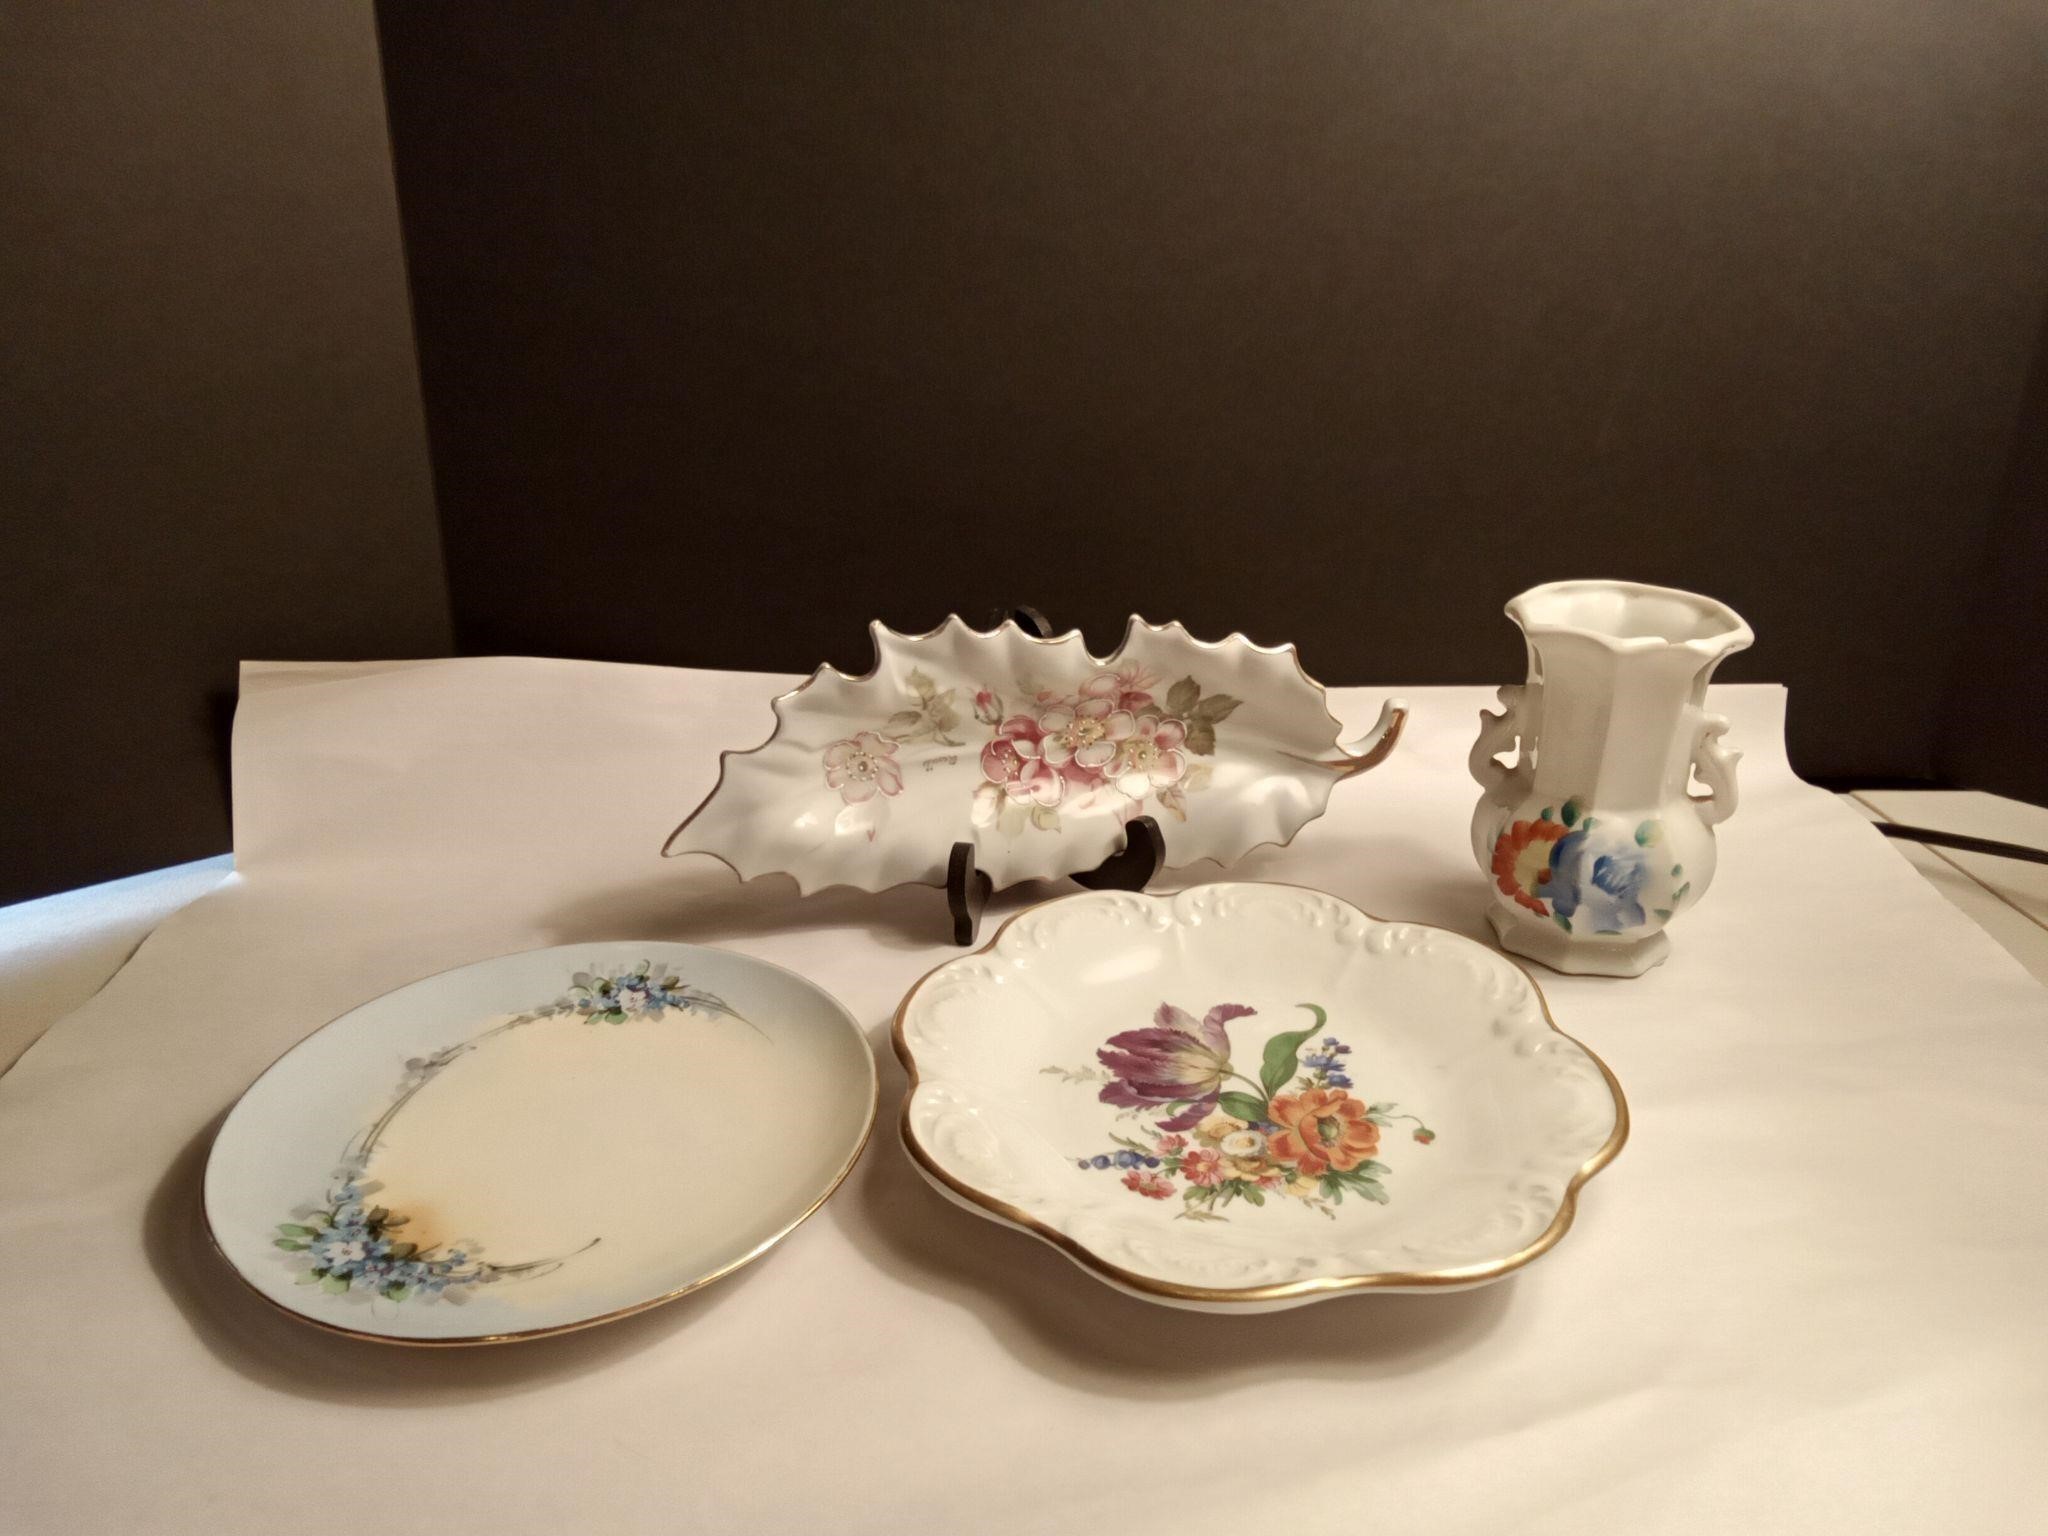 Items from Japan and West Germany